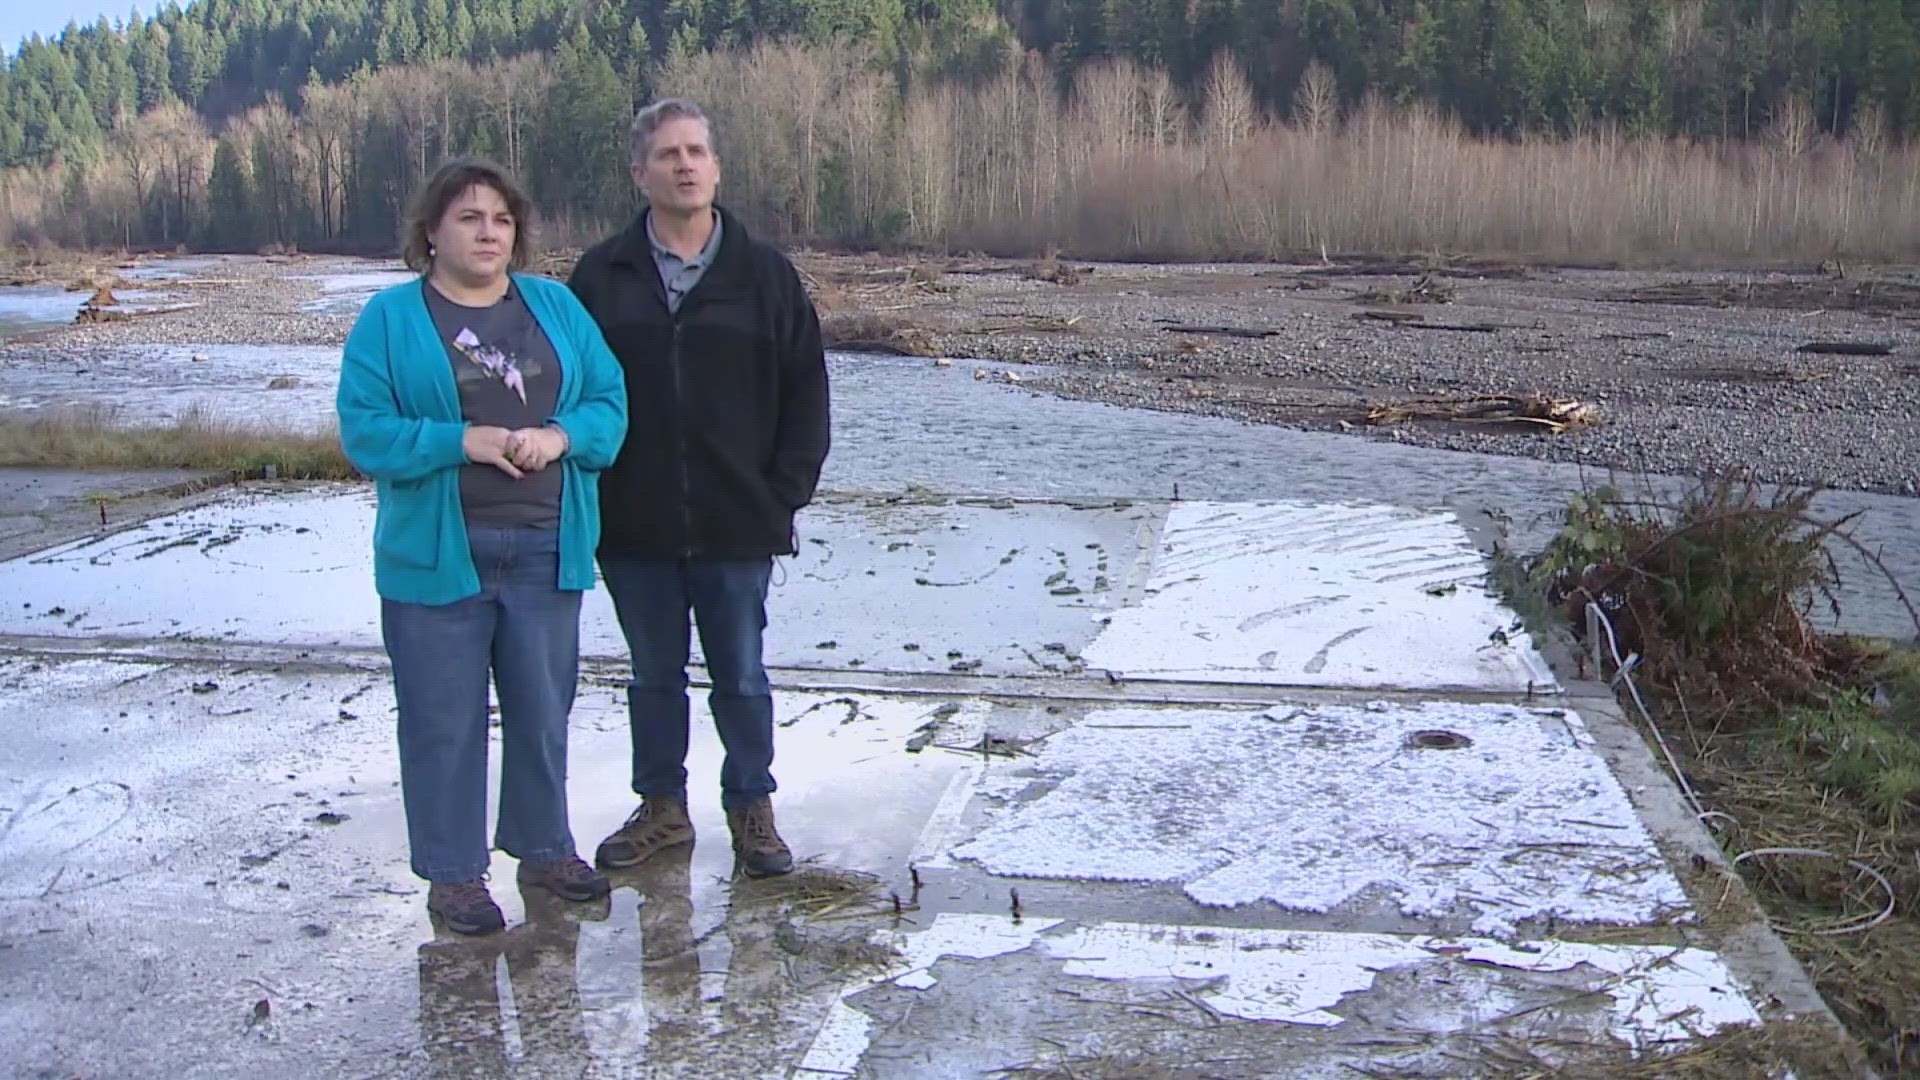 Shauna and Kevin Pelley owe $38,000 to Pierce County after their home along the Puyallup River was torn down earlier this month.